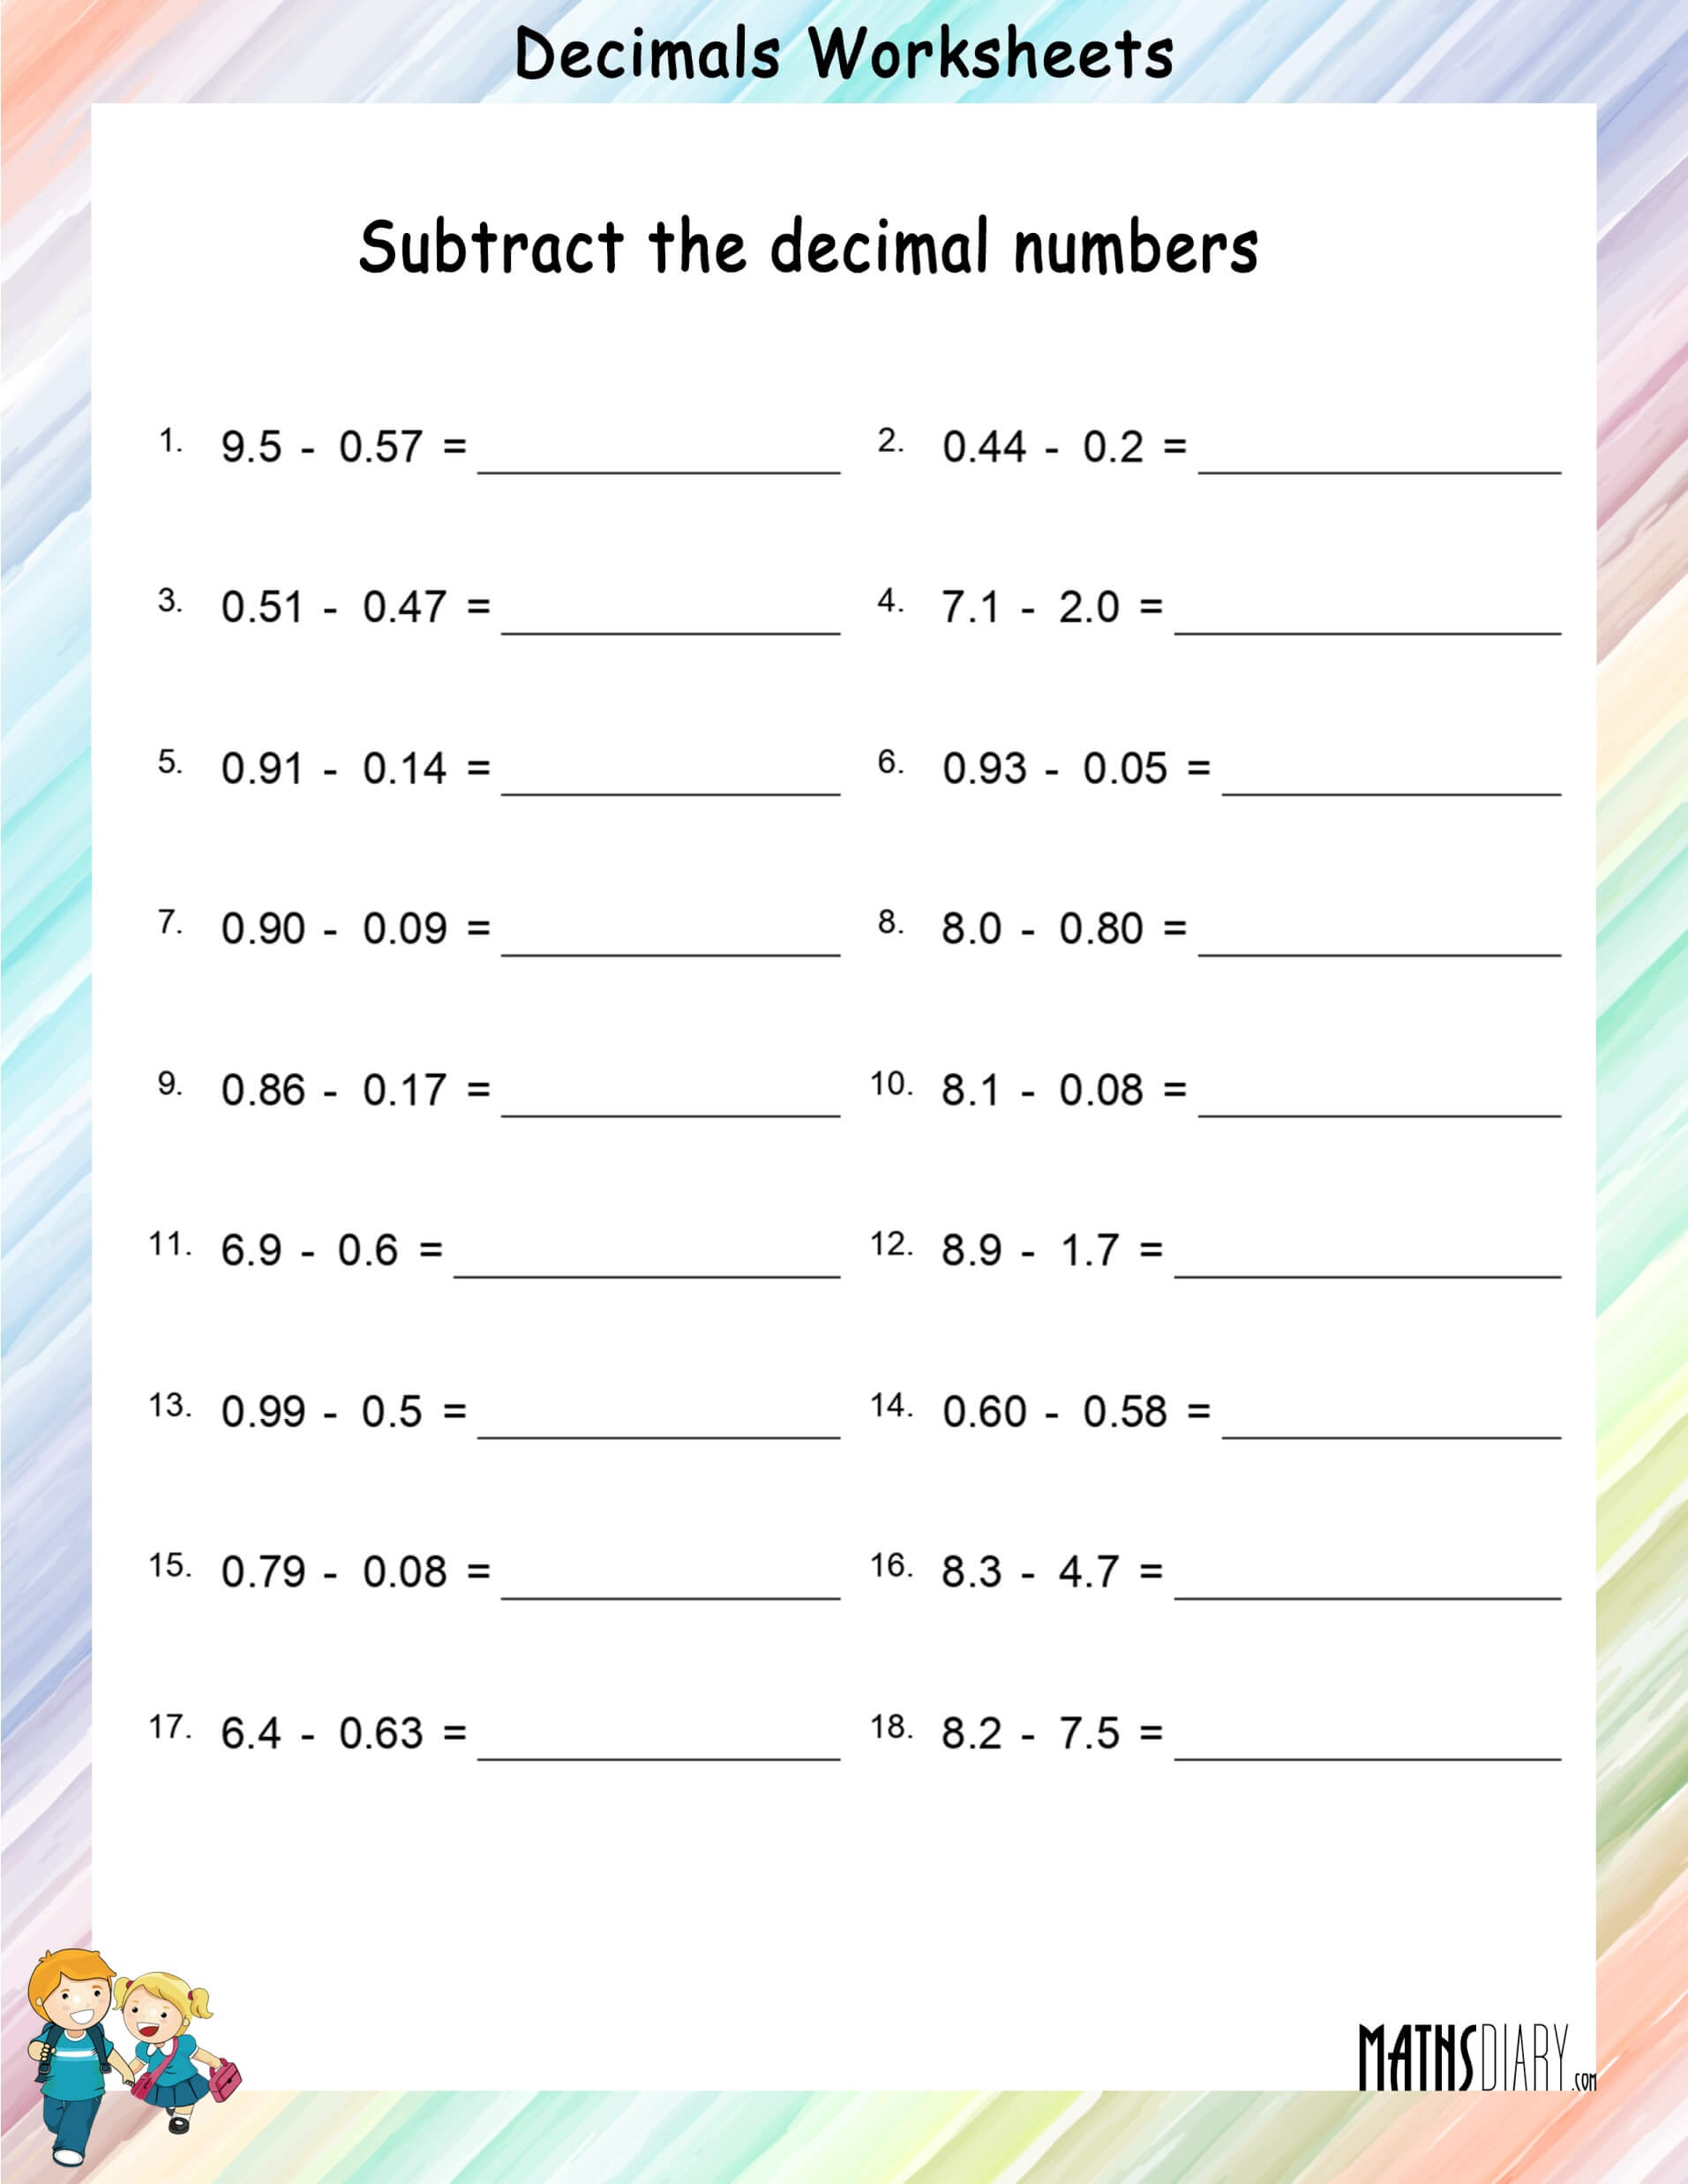 subtraction-of-decimal-numbers-math-worksheets-mathsdiary